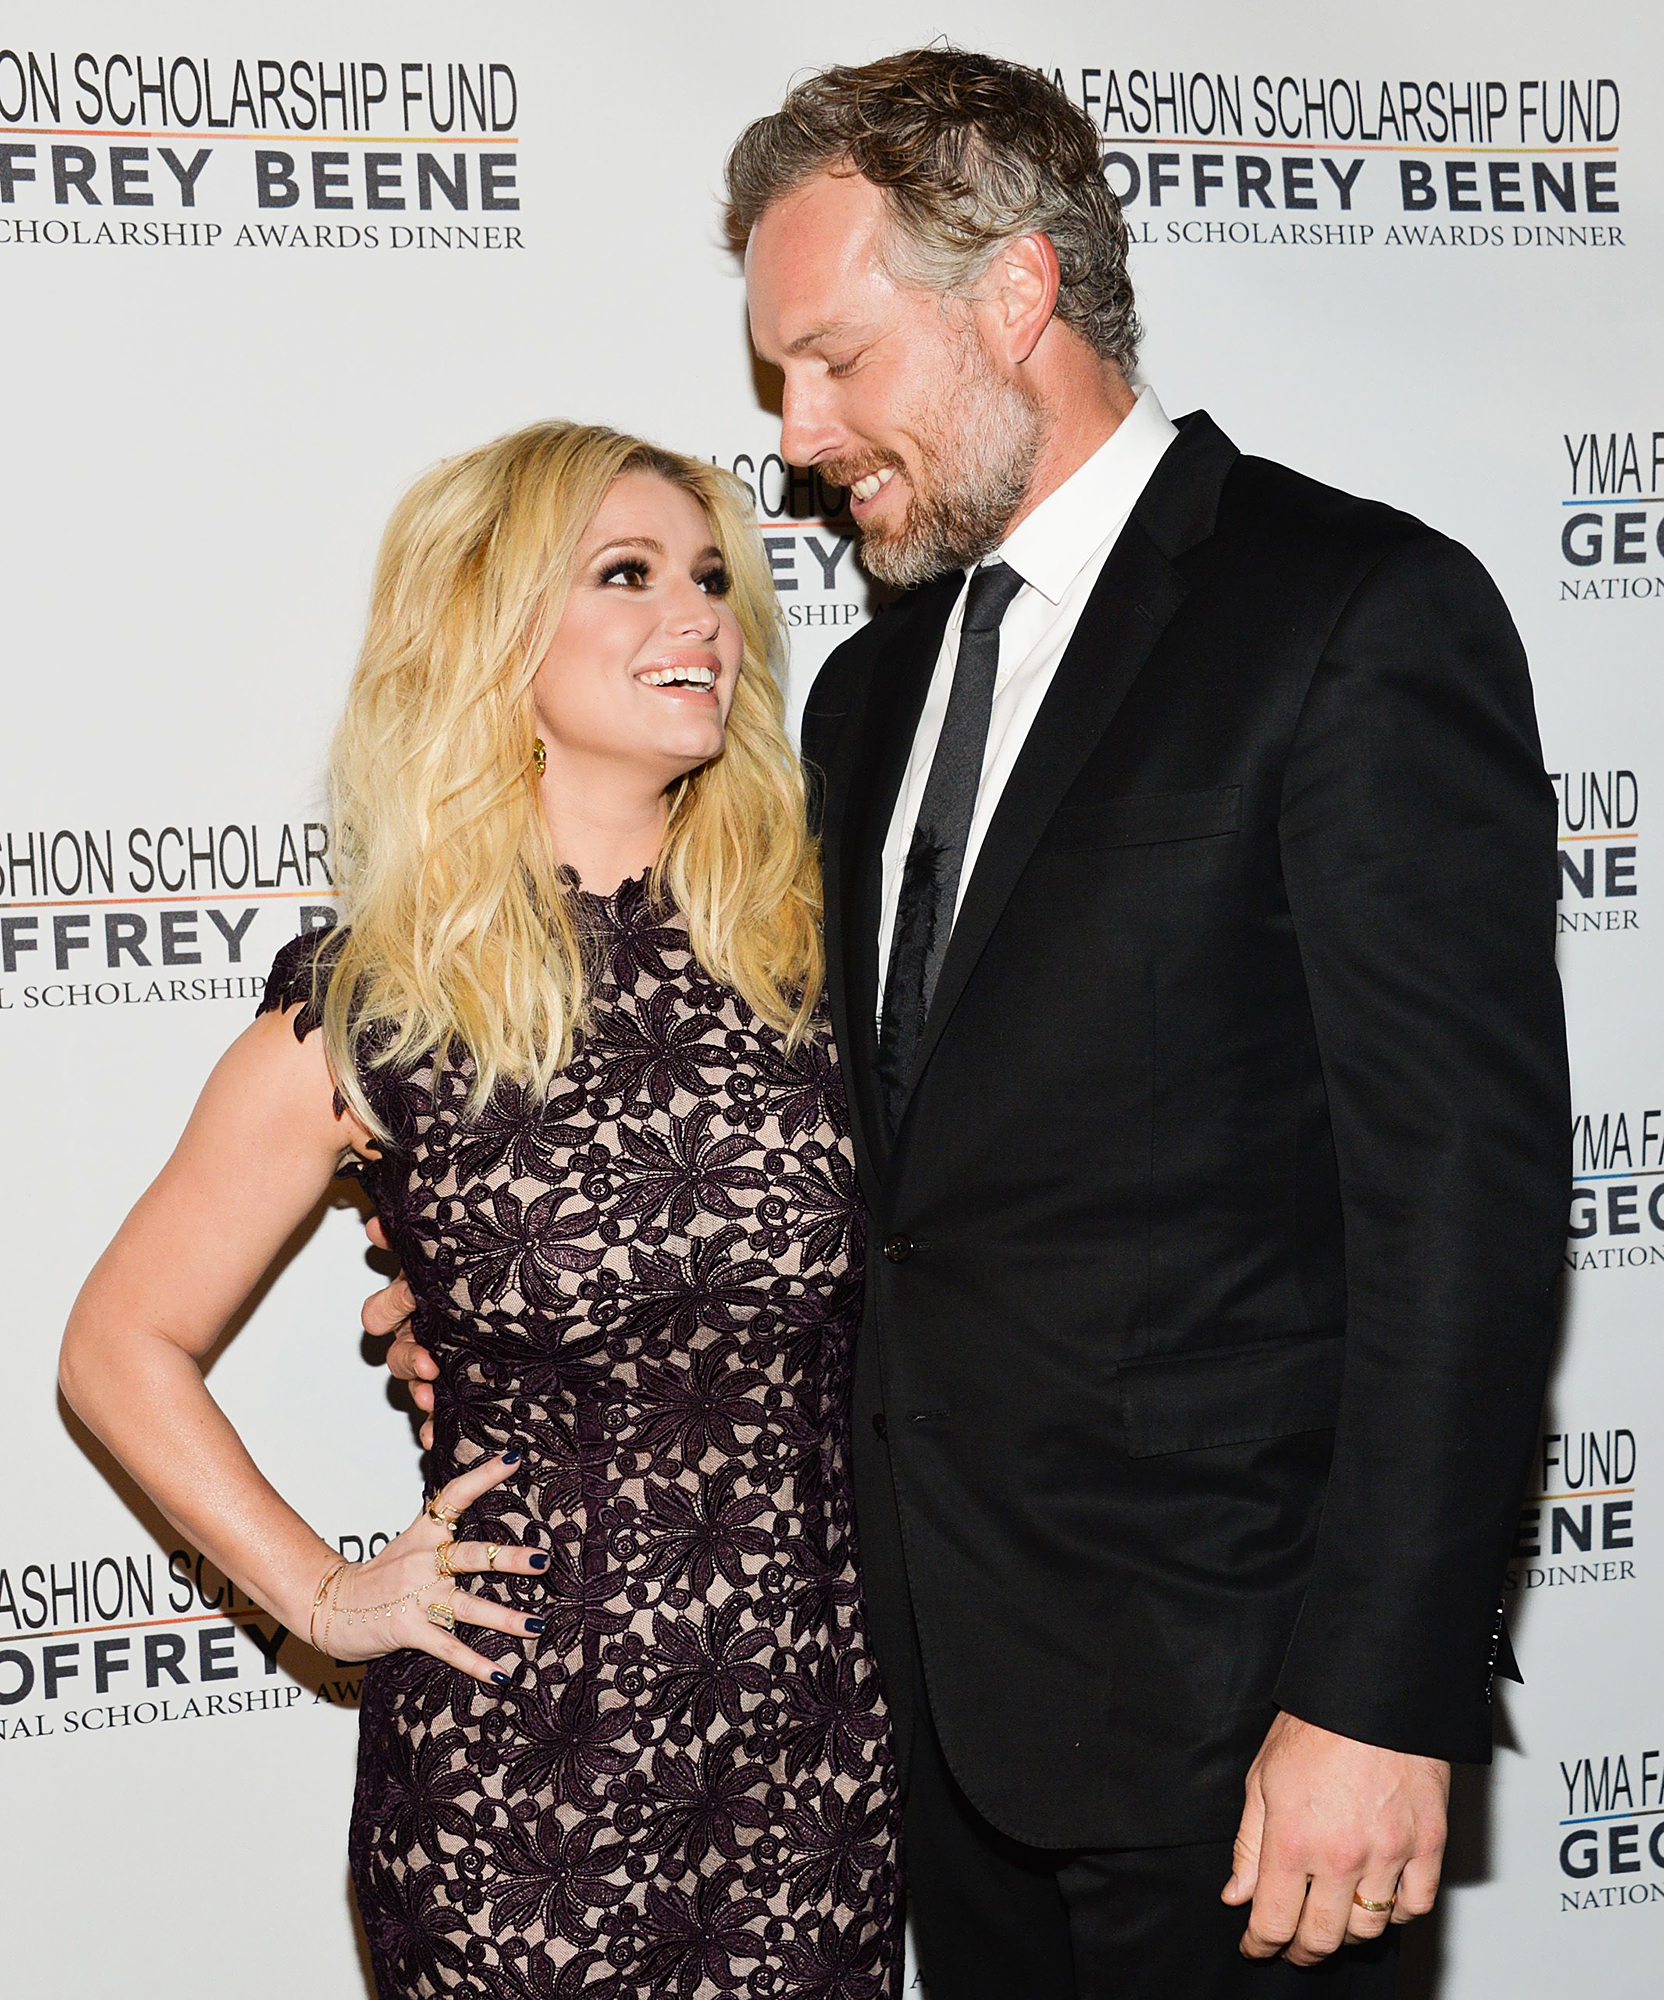 Jessica Simpson and Eric Johnson Have Had 'Issues' but Are Both